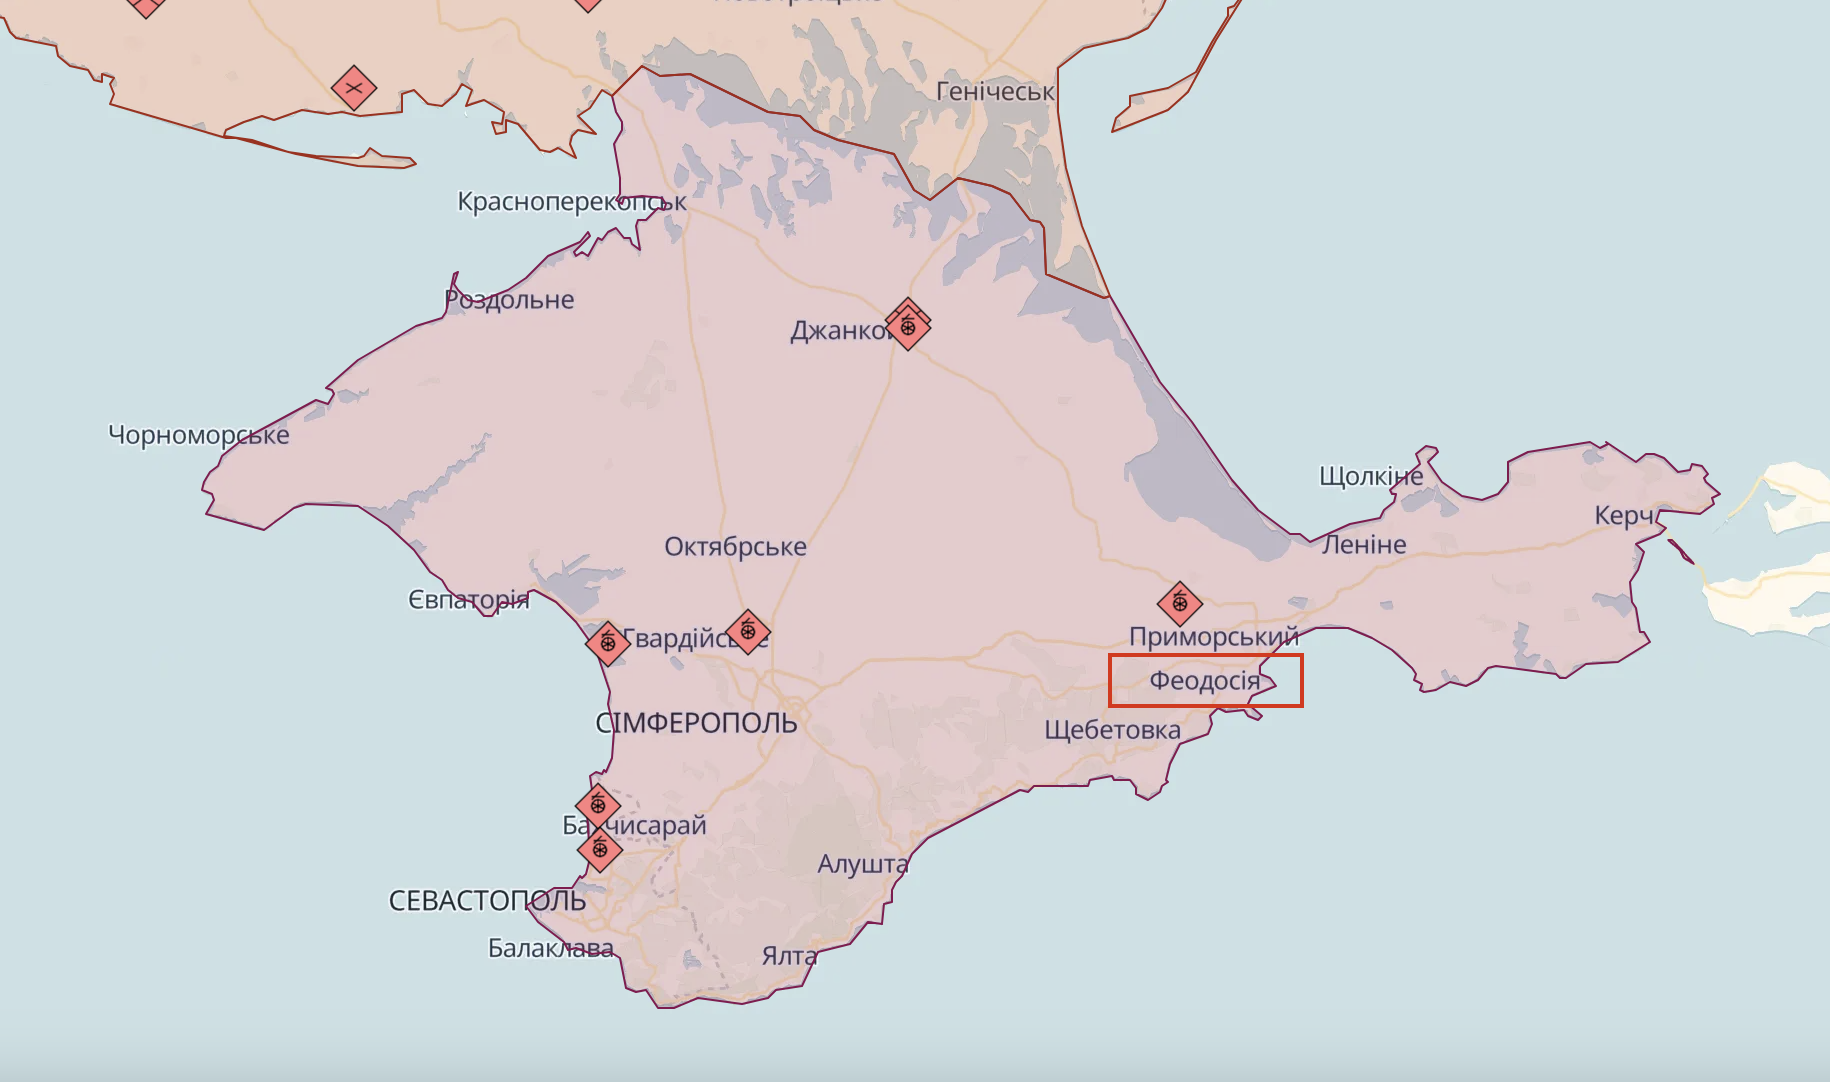 Feodosia on the map.